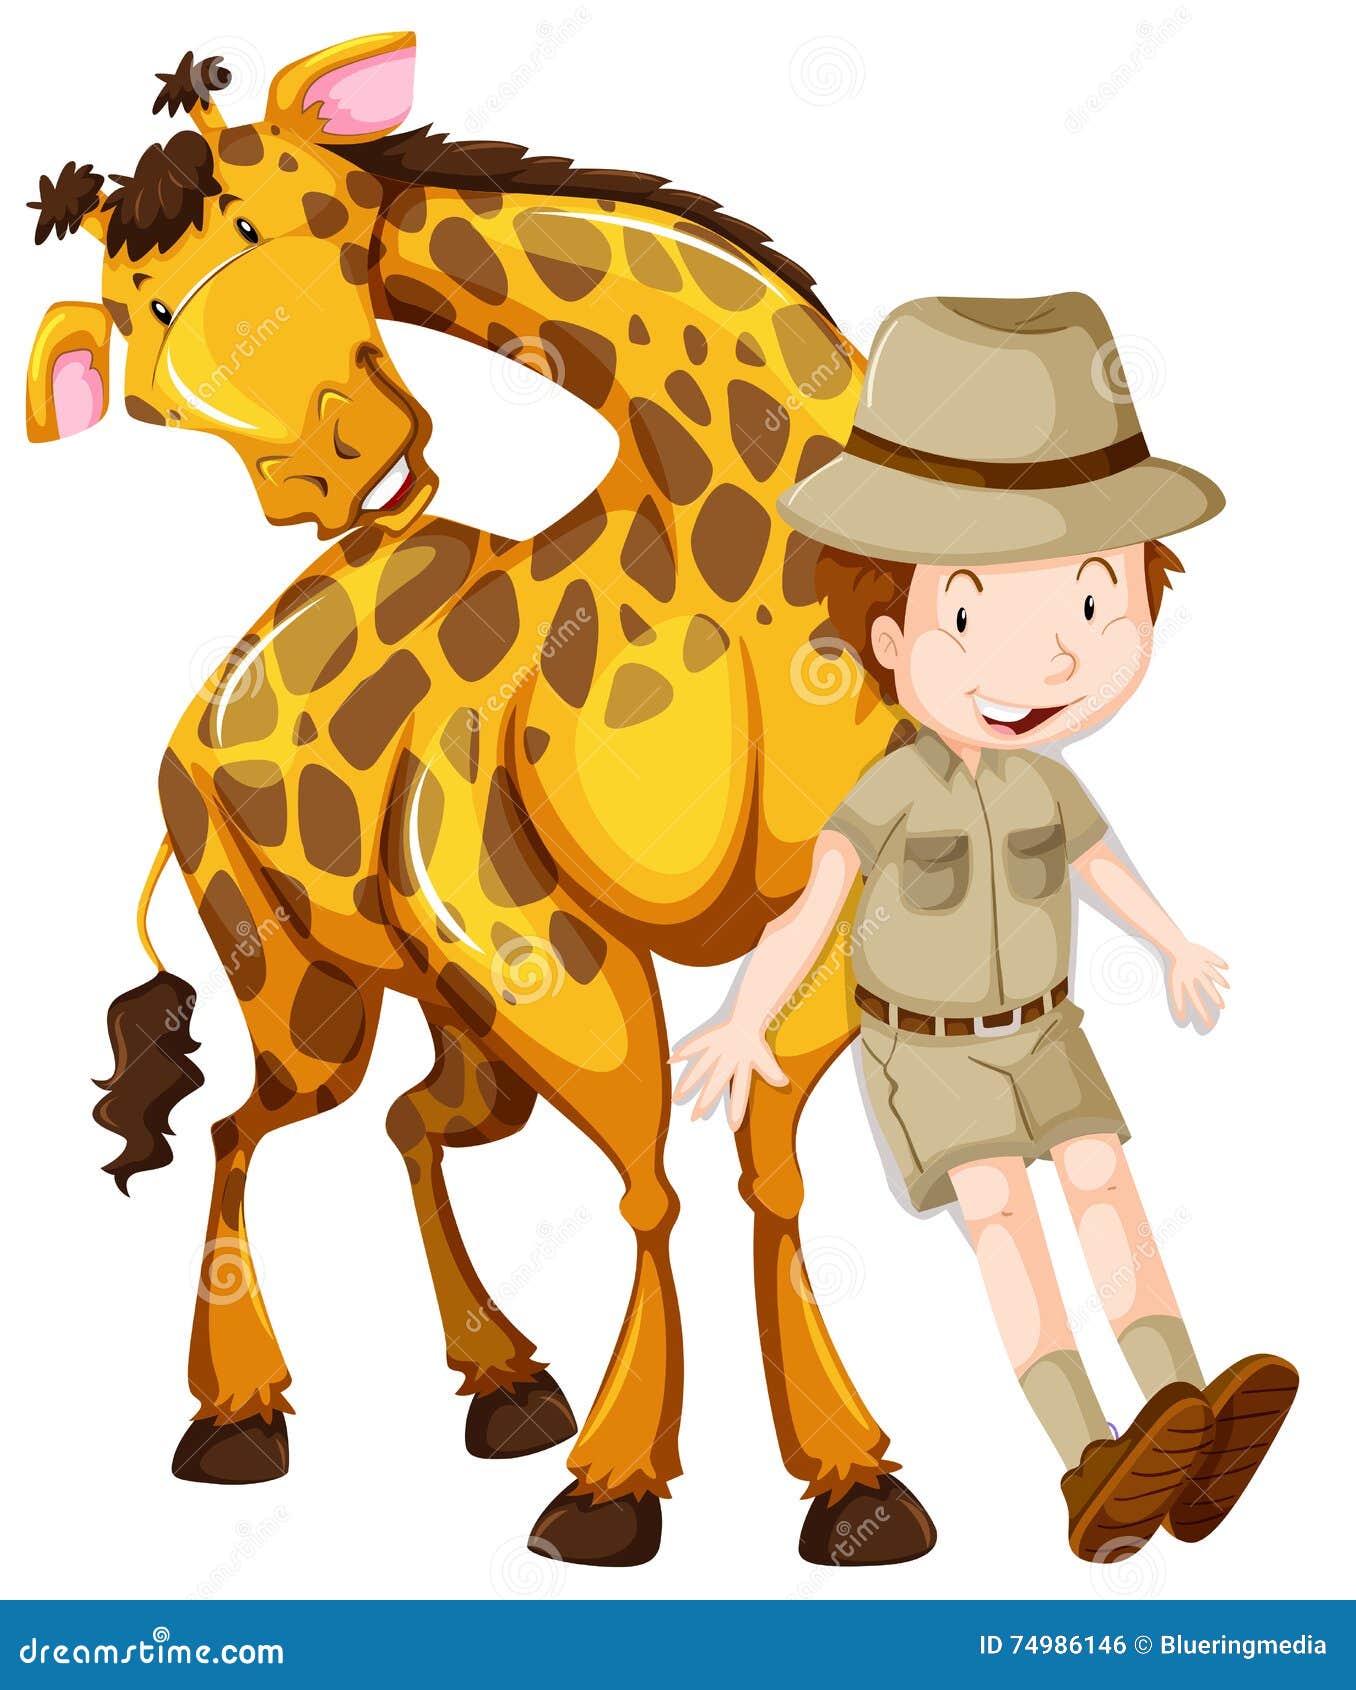 zoologist clipart - photo #23